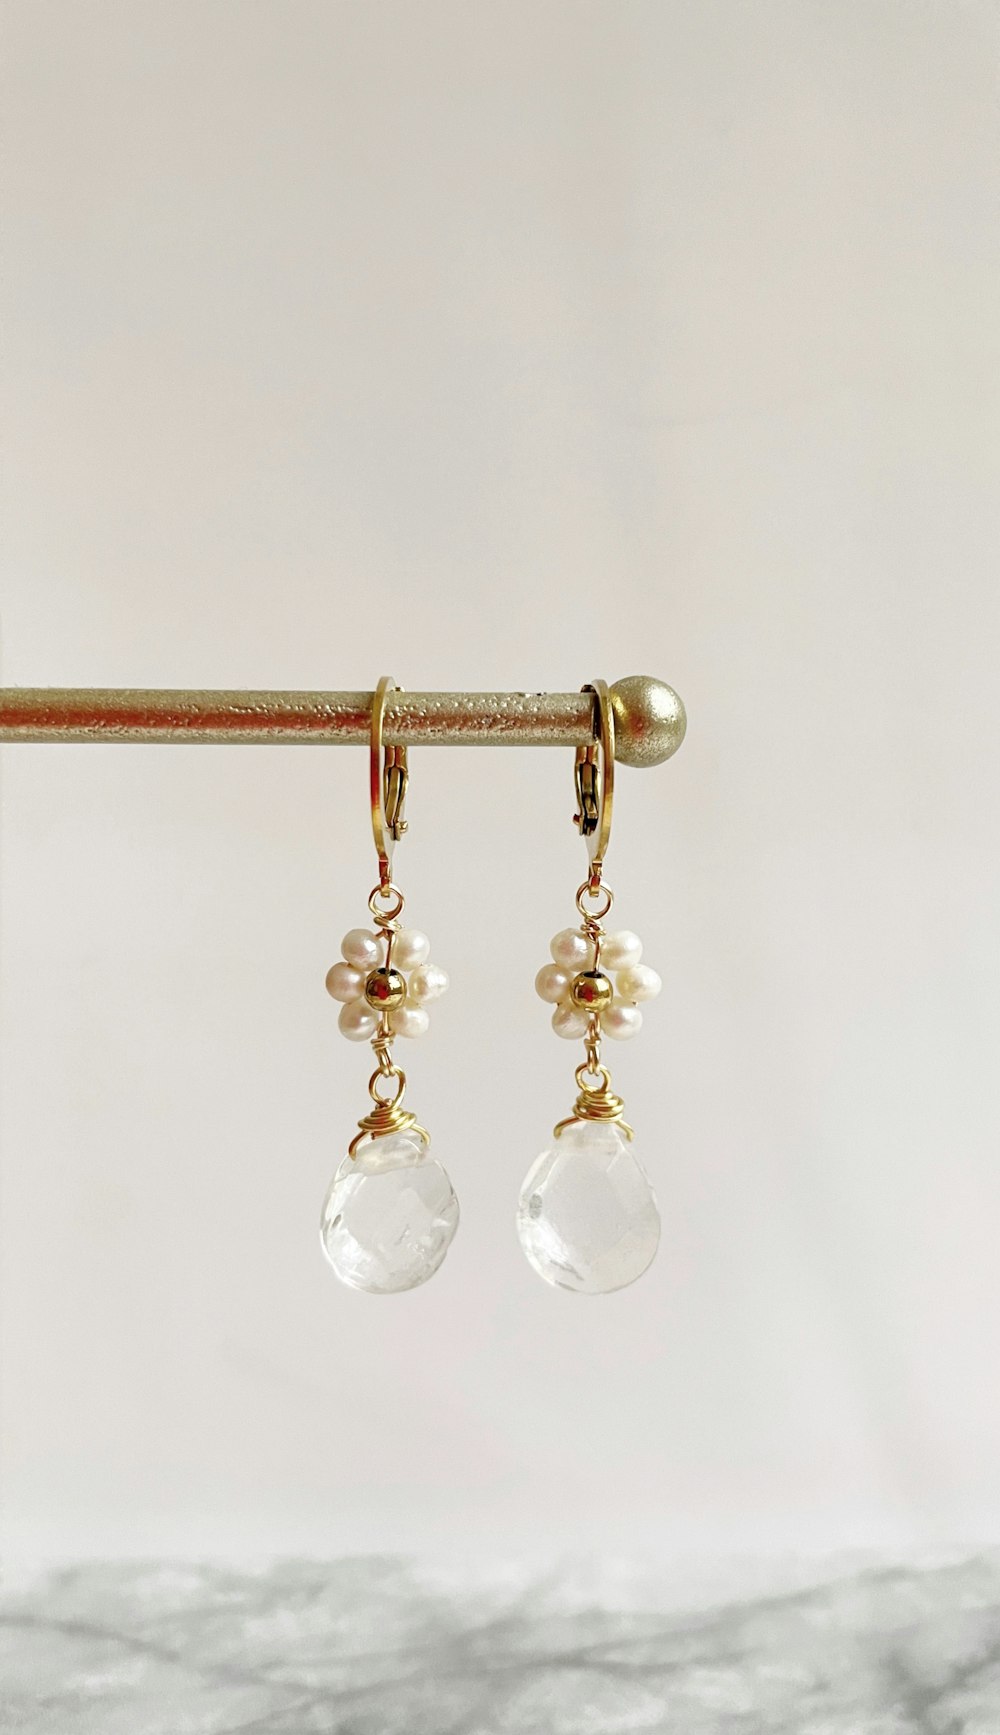 a pair of earrings on a string